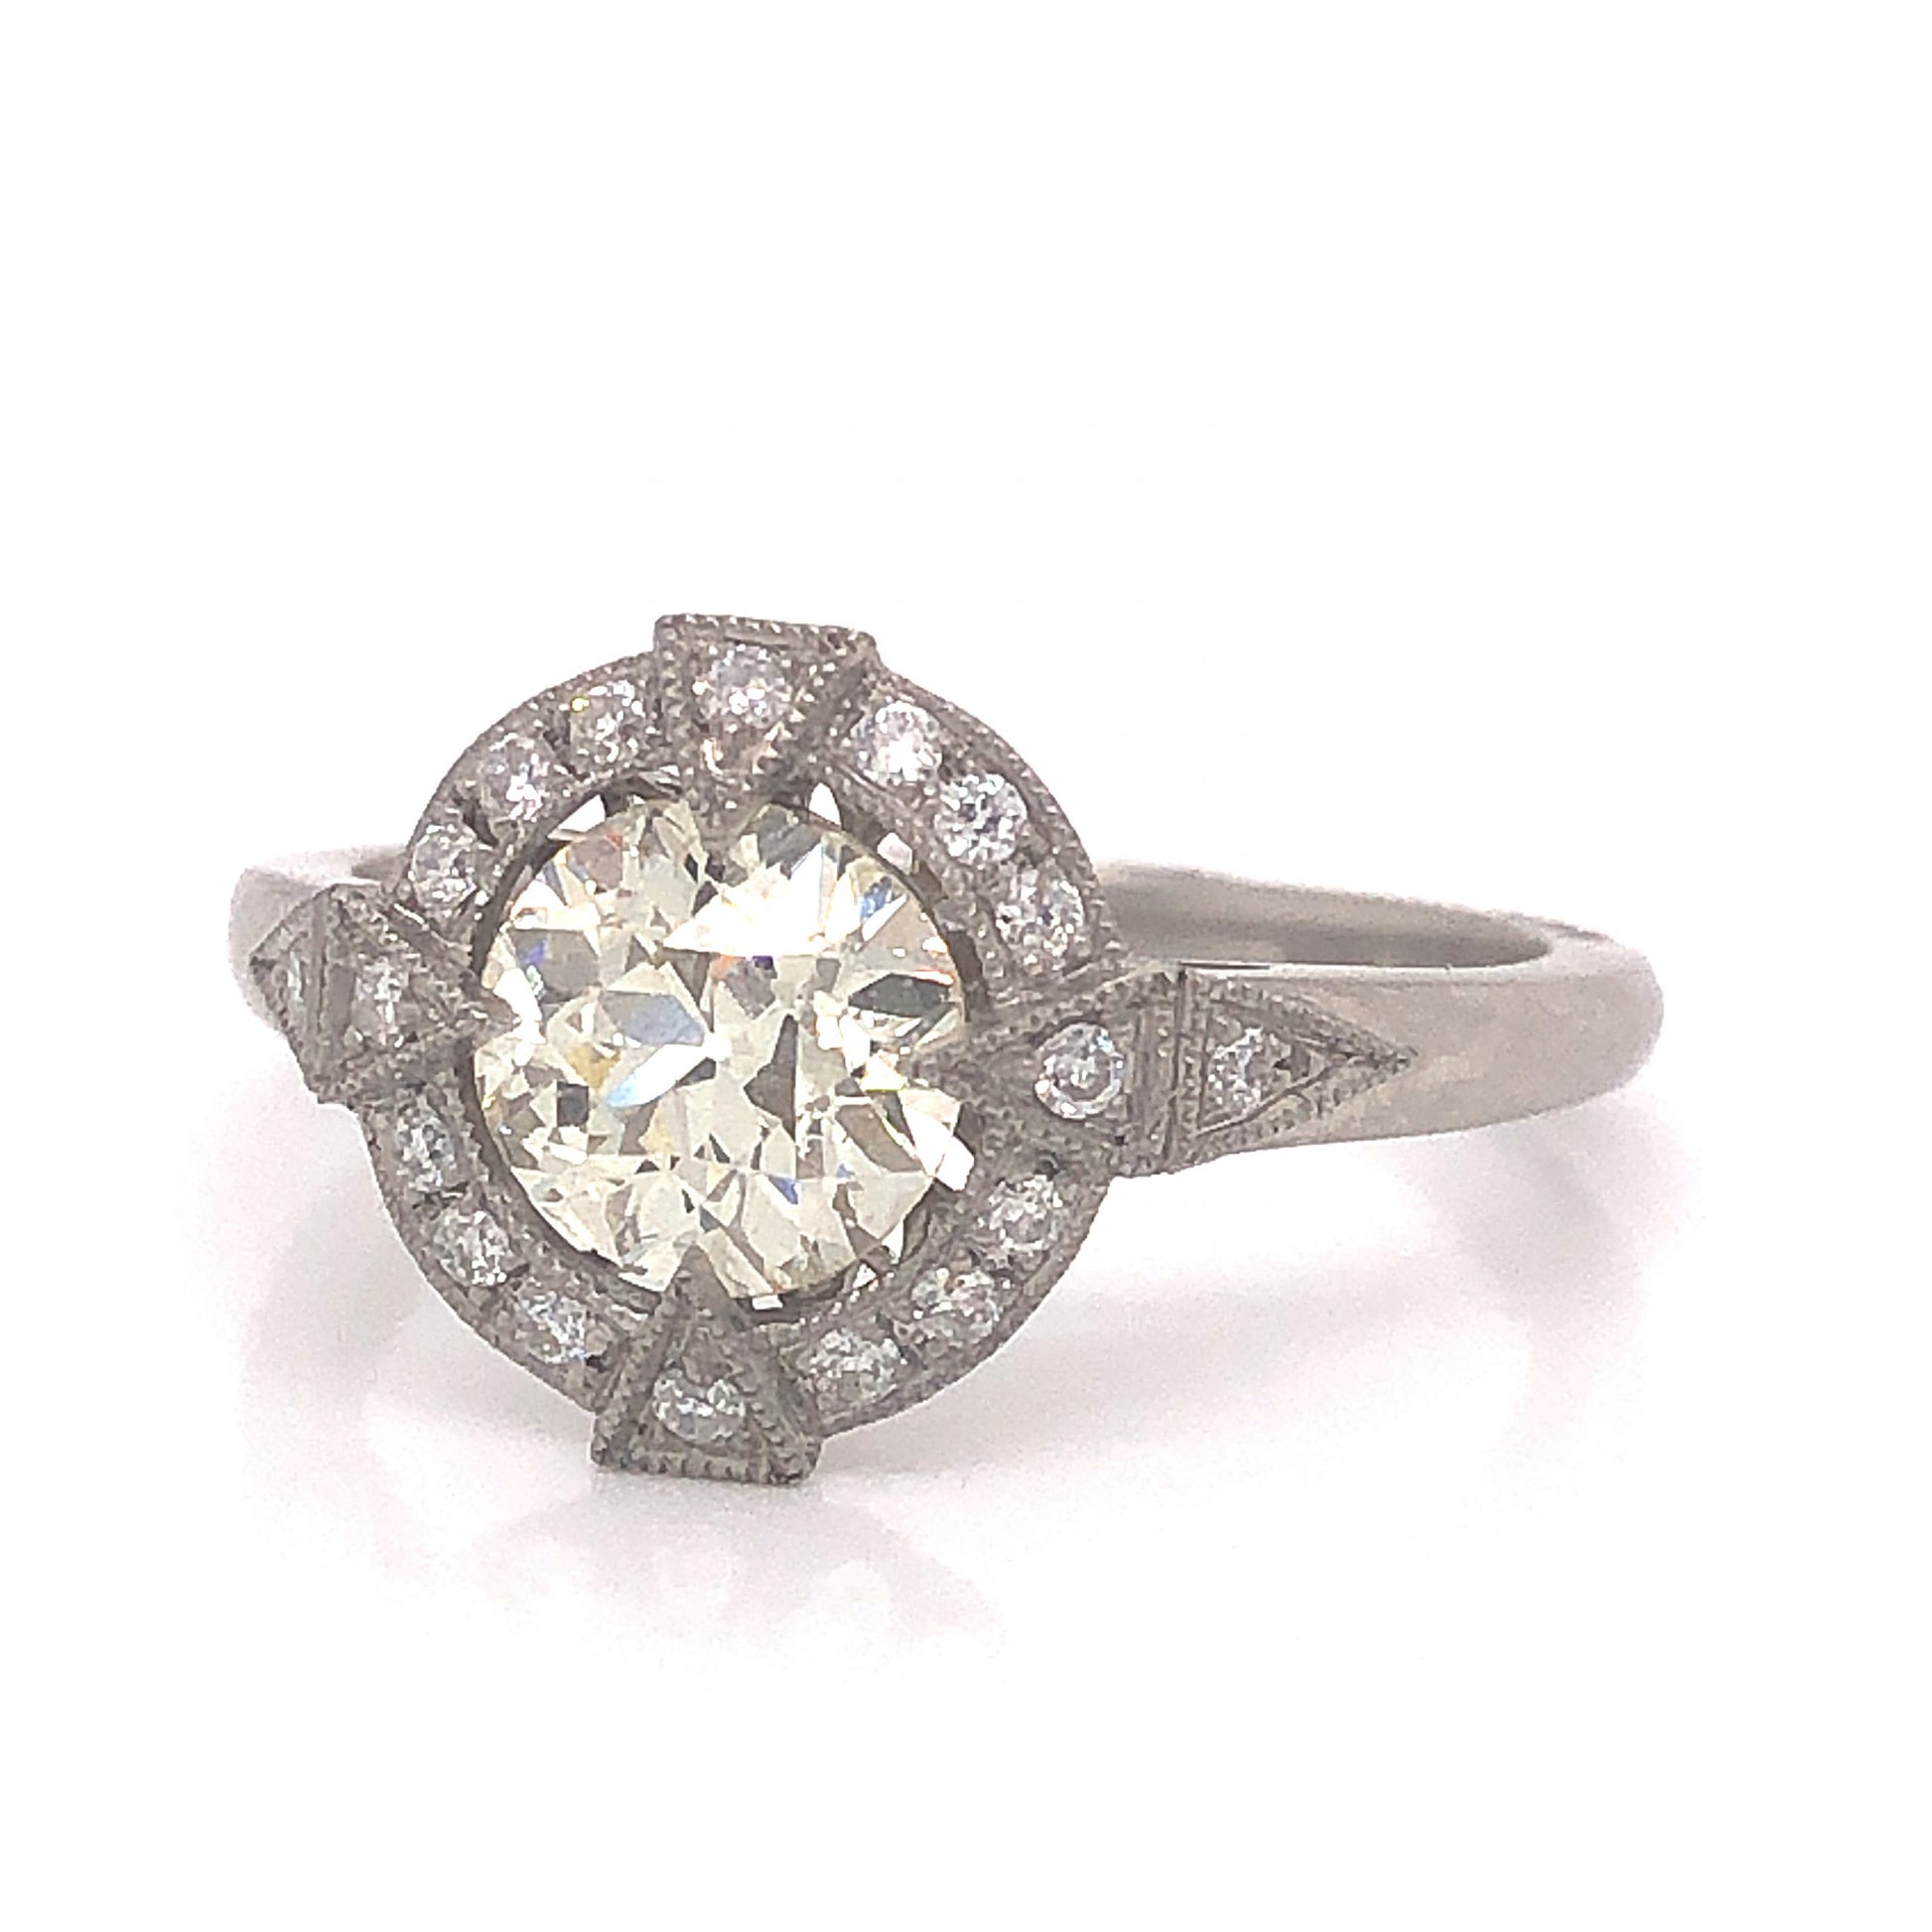 Geometric Antique Inspired Diamond Engagement Ring in PlatinumComposition: Platinum Ring Size: 6.5 Total Diamond Weight: 1.18ct Total Gram Weight: 4.4 g Inscription: Plat Sophia D.
      